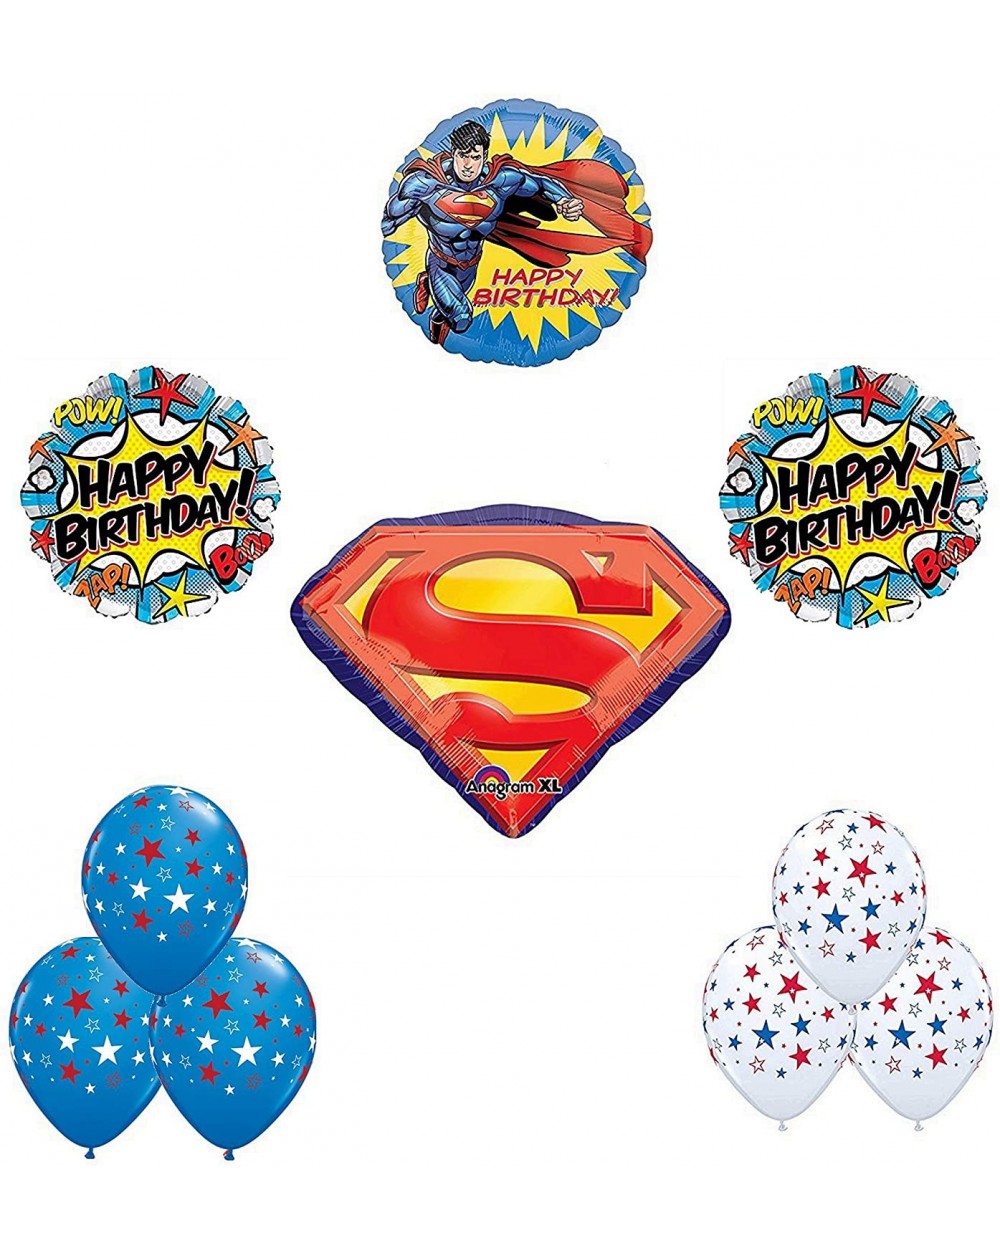 Balloons Superman Party Supplies Happy Birthday Balloon Bouquet Decoration - C519IGS0YOM $15.95